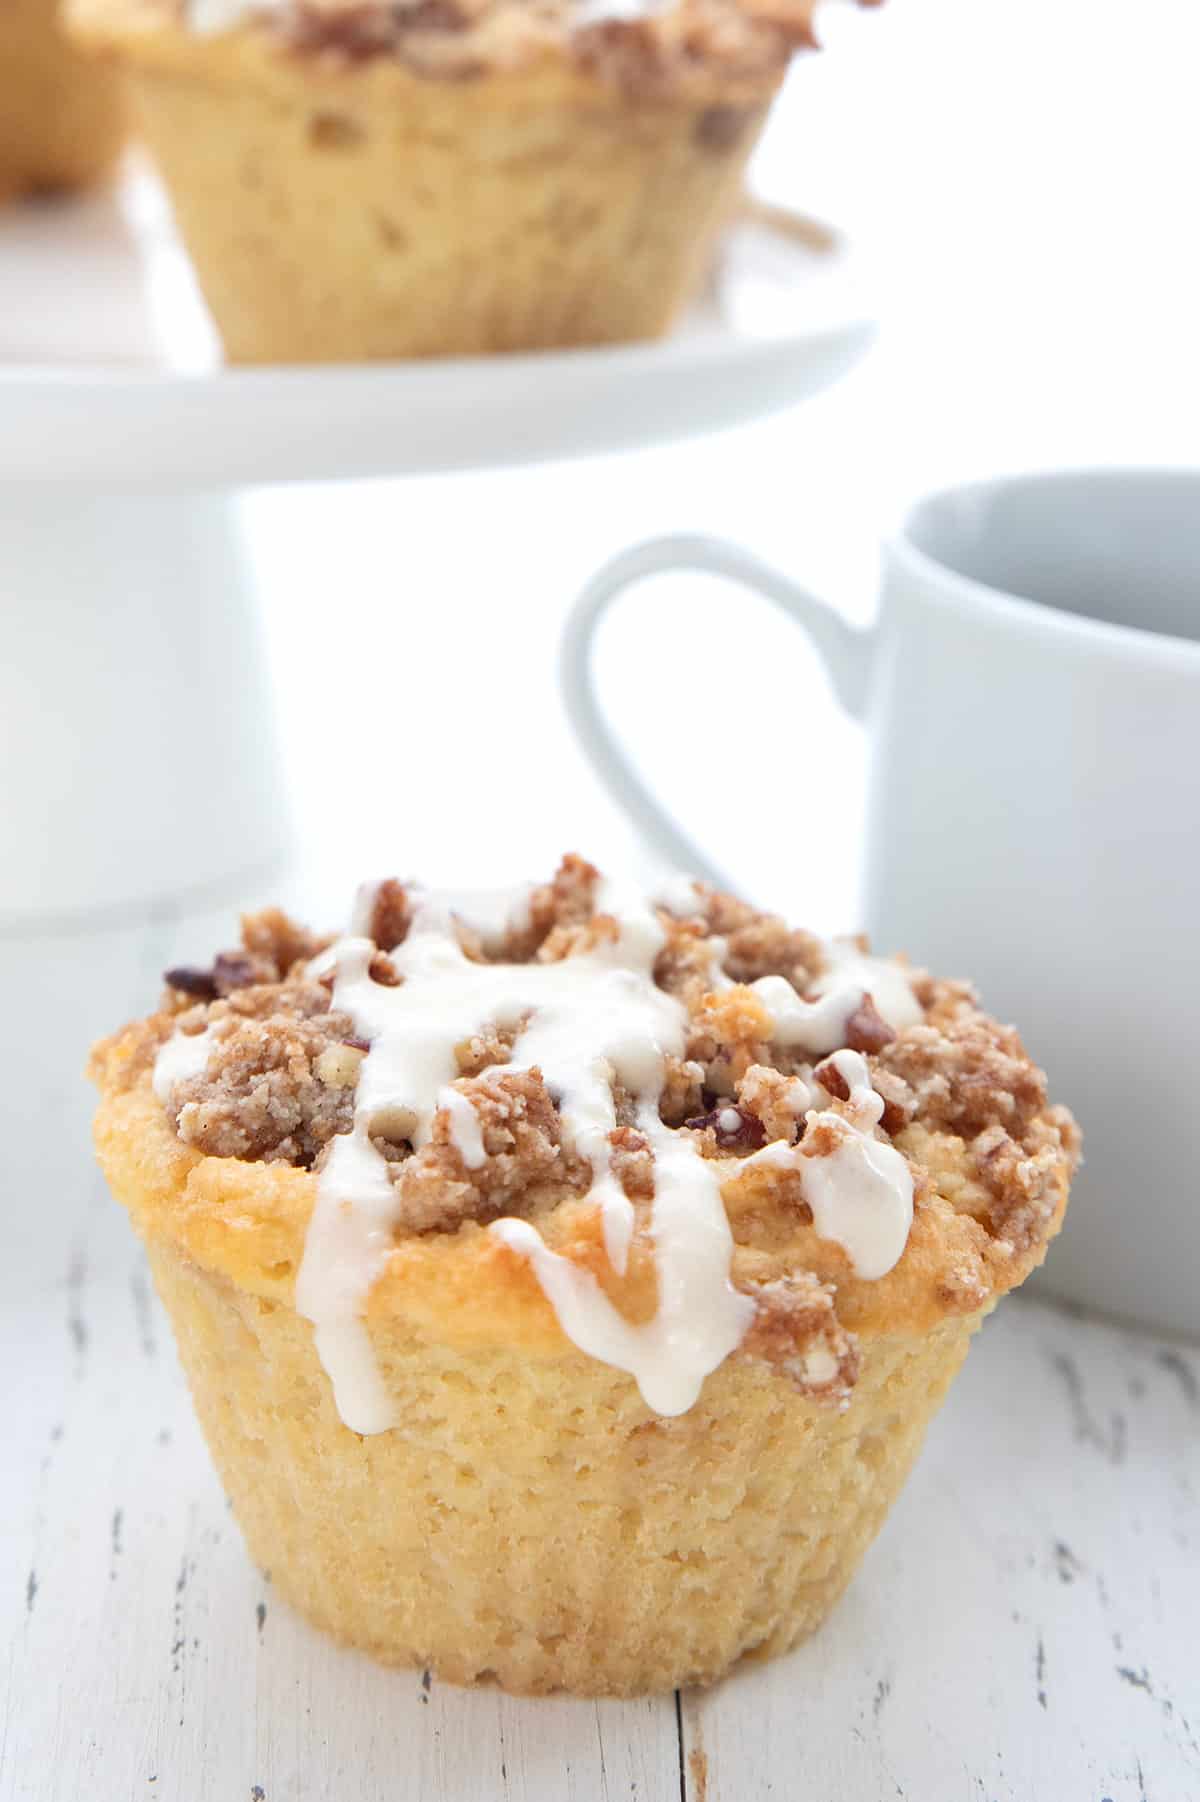 A keto muffin with crumb topping and vanilla drizzle on a white wooden table.